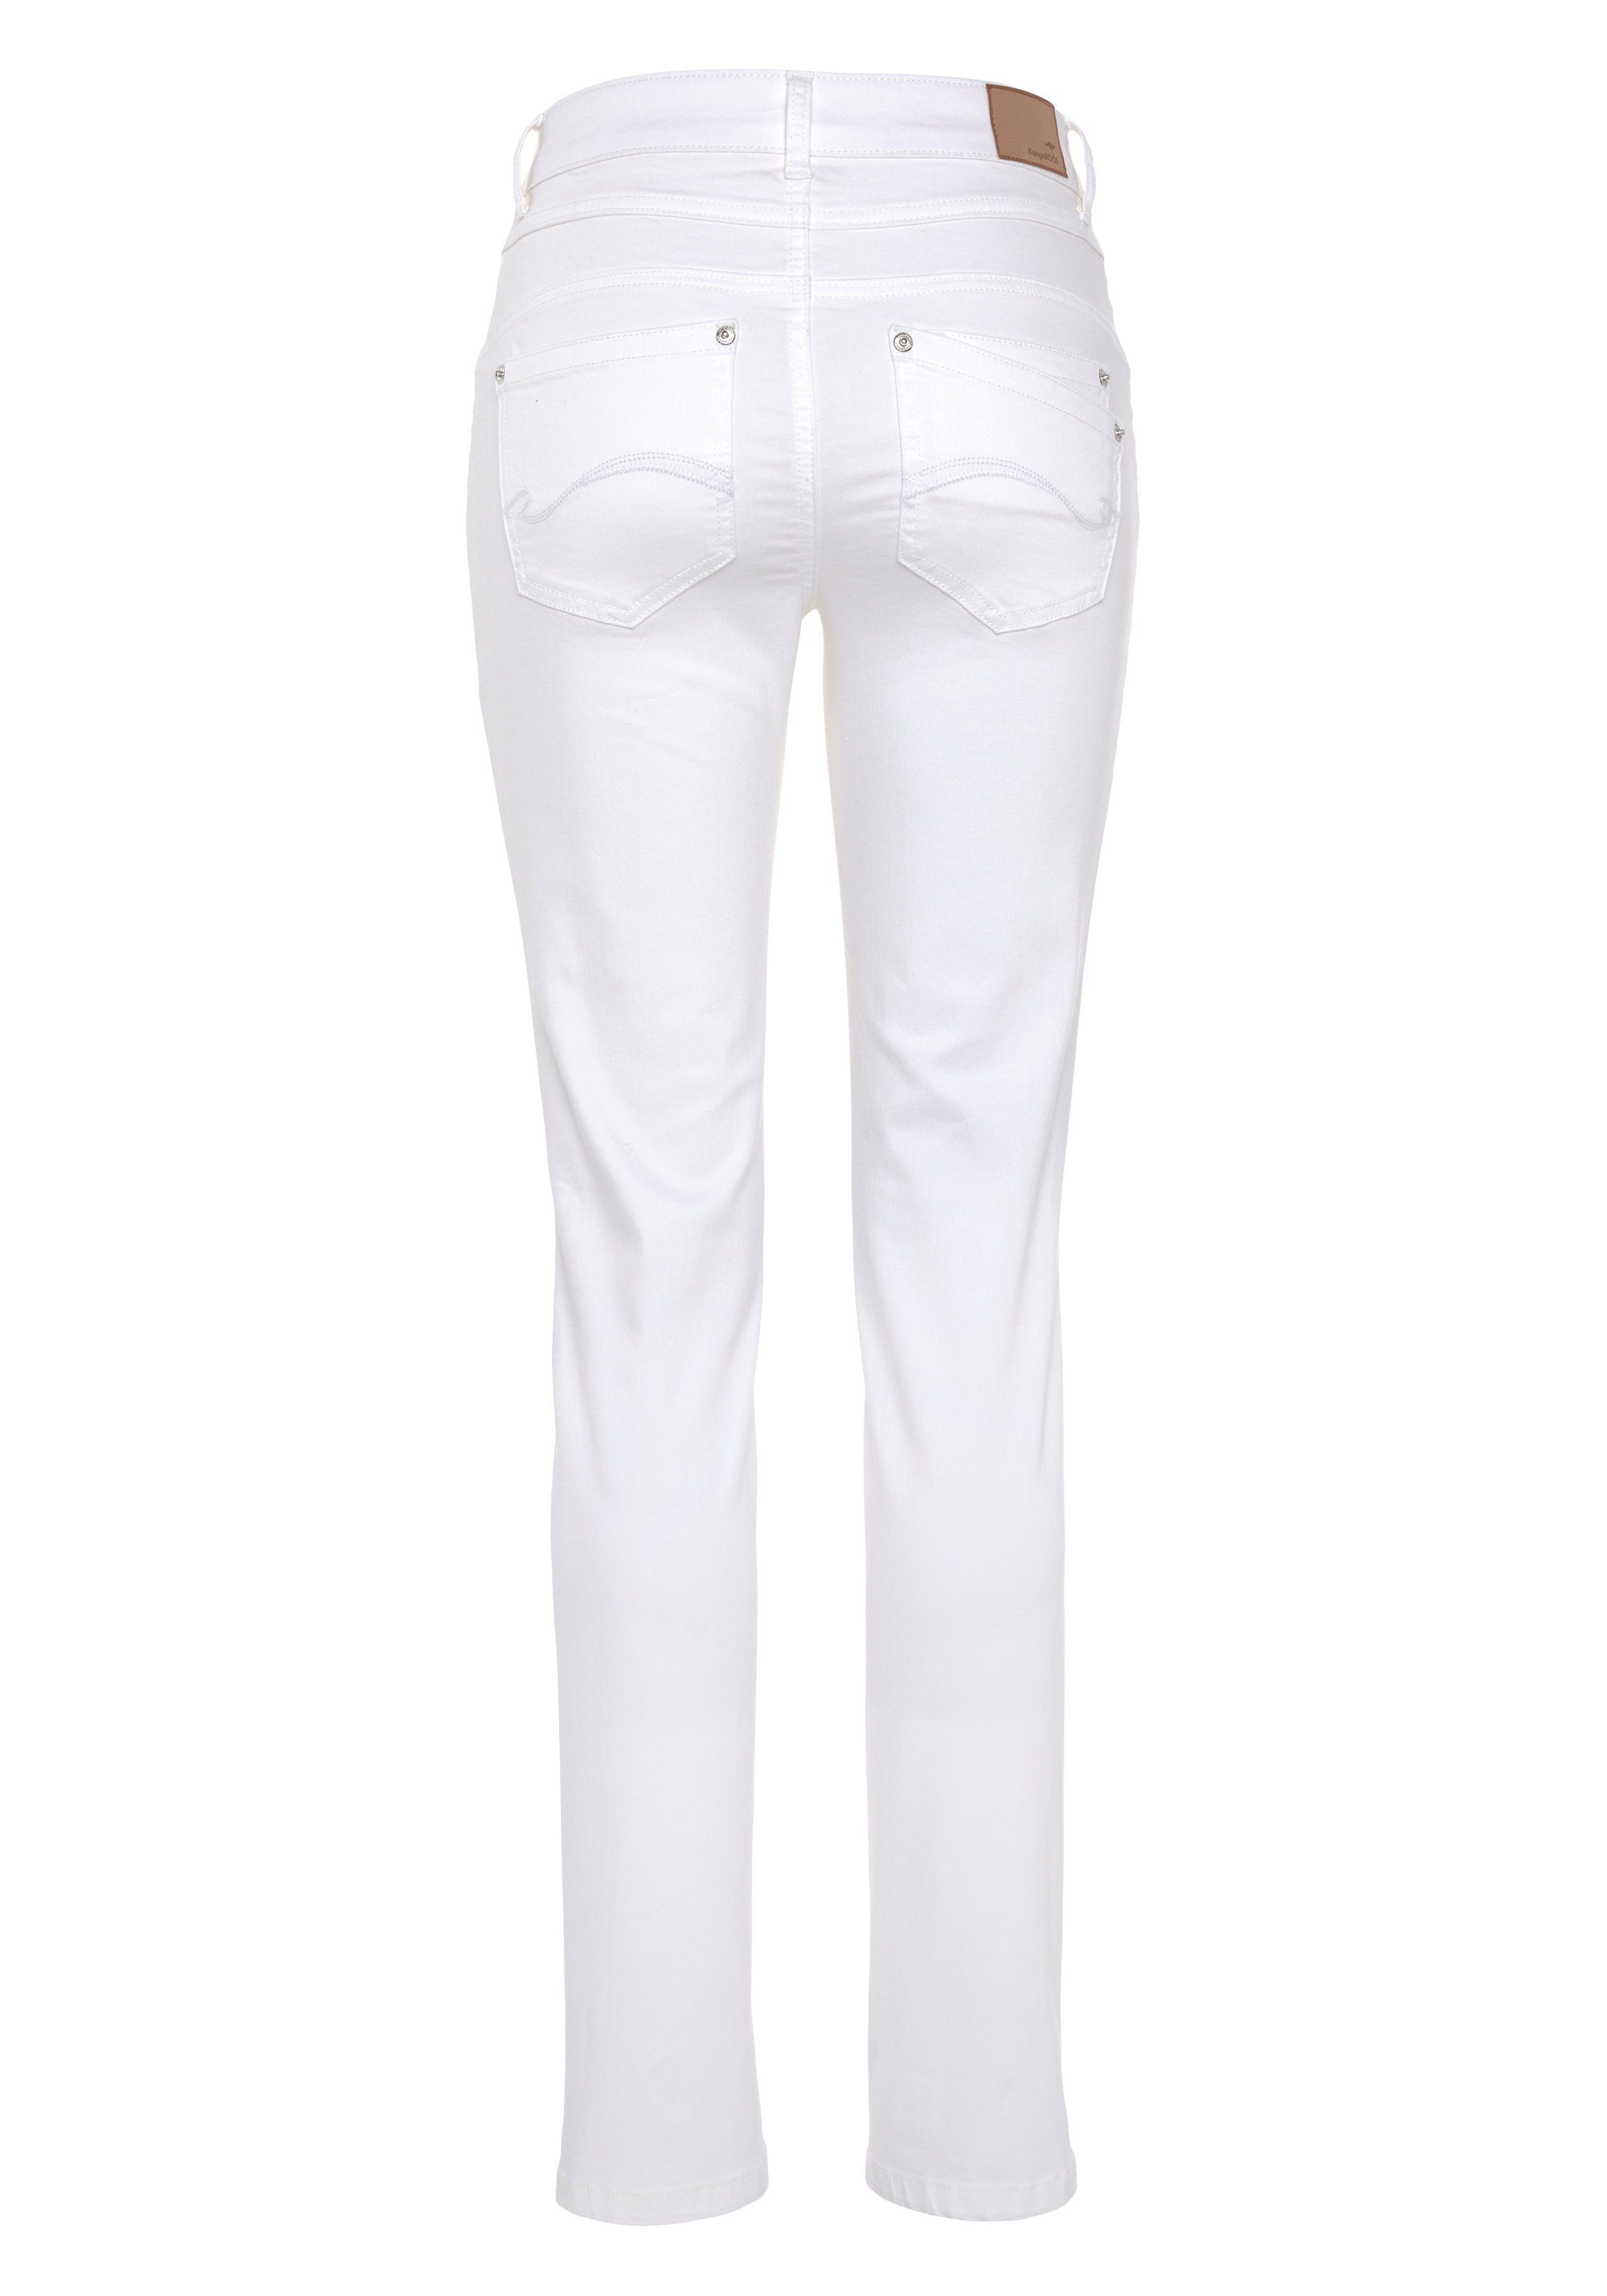 KangaROOS Relax-fit-Jeans RELAX-FIT WAIST white HIGH